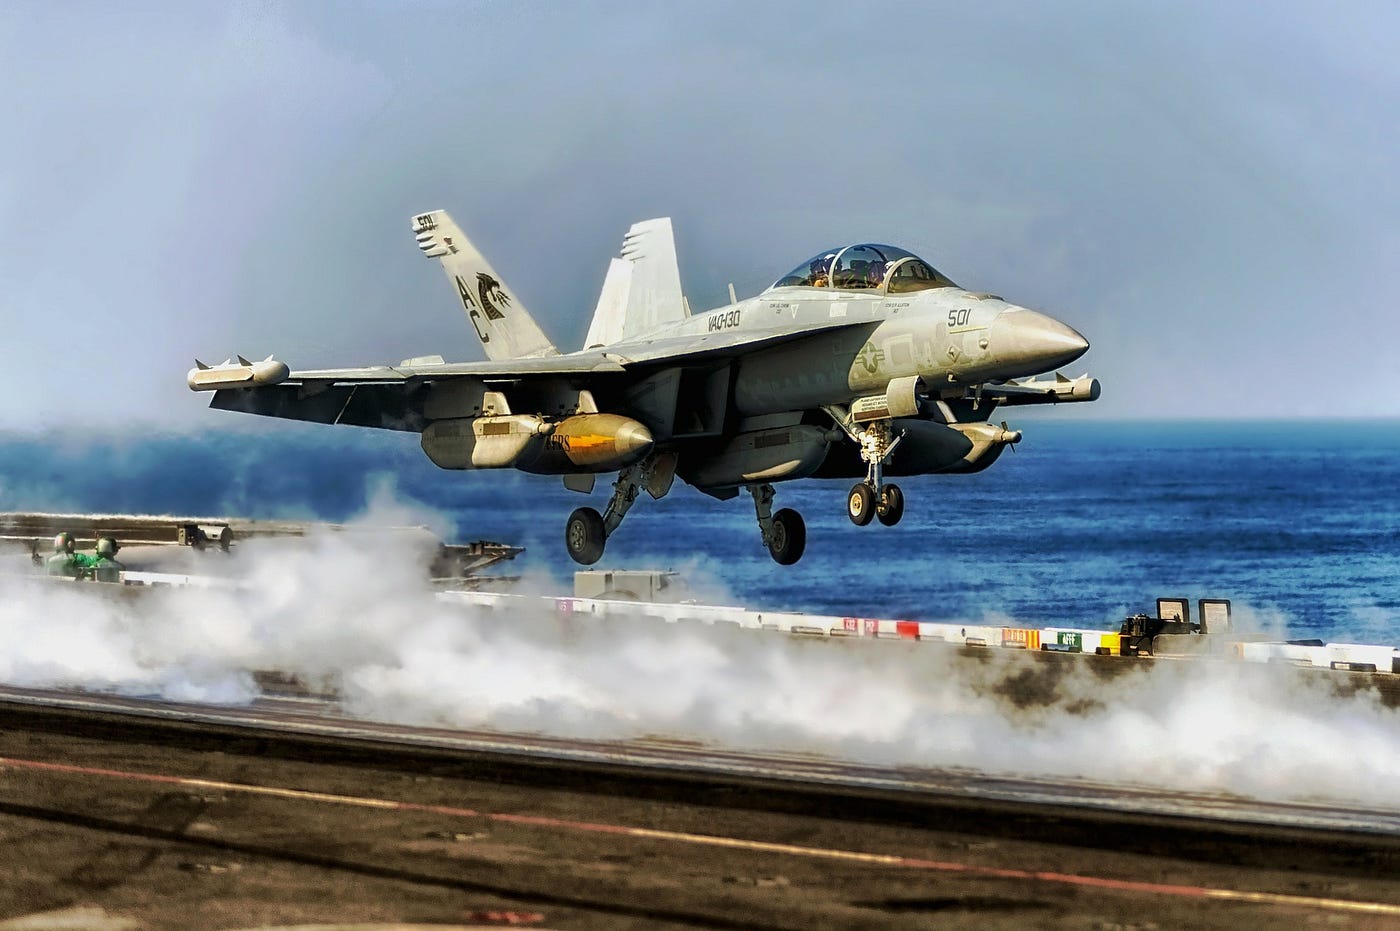 A Navy fighter jet taking off from an aircraft carrier